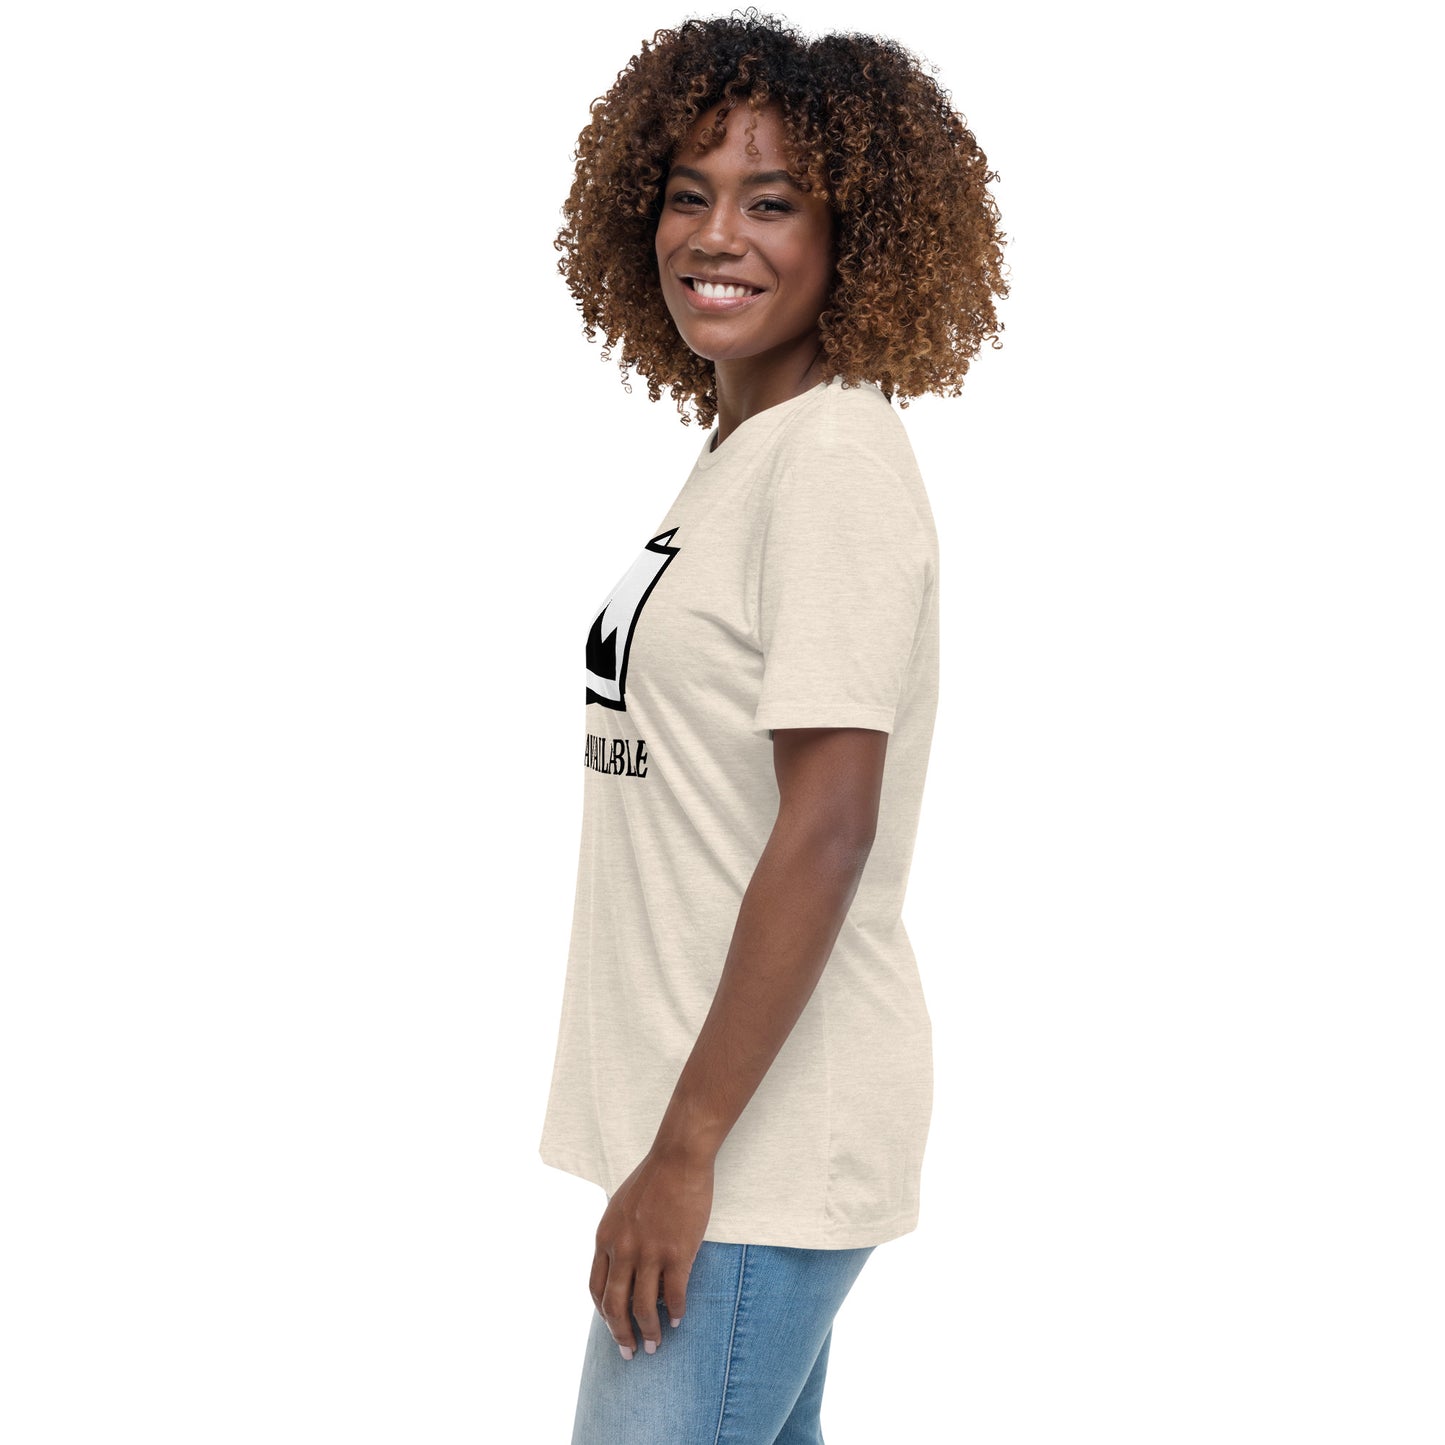 Women with citron t-shirt with image and text "no image available"